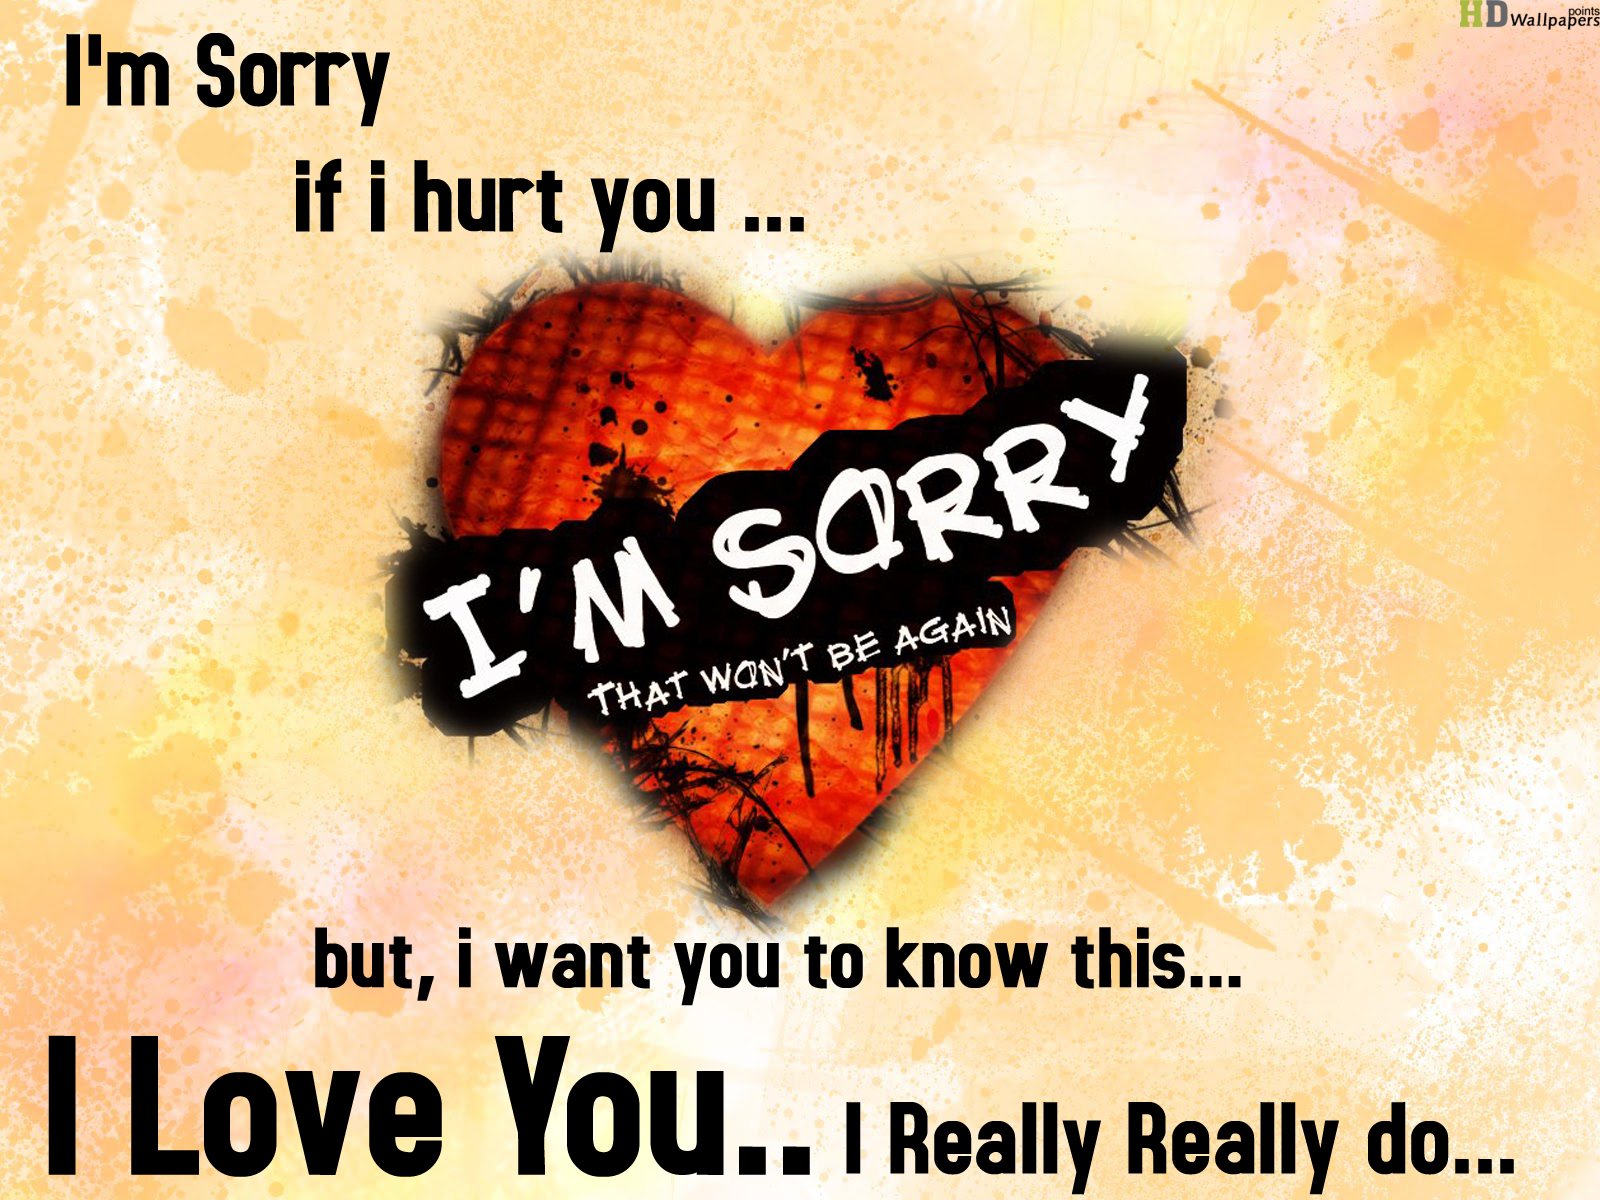 im sorry love quotes for him